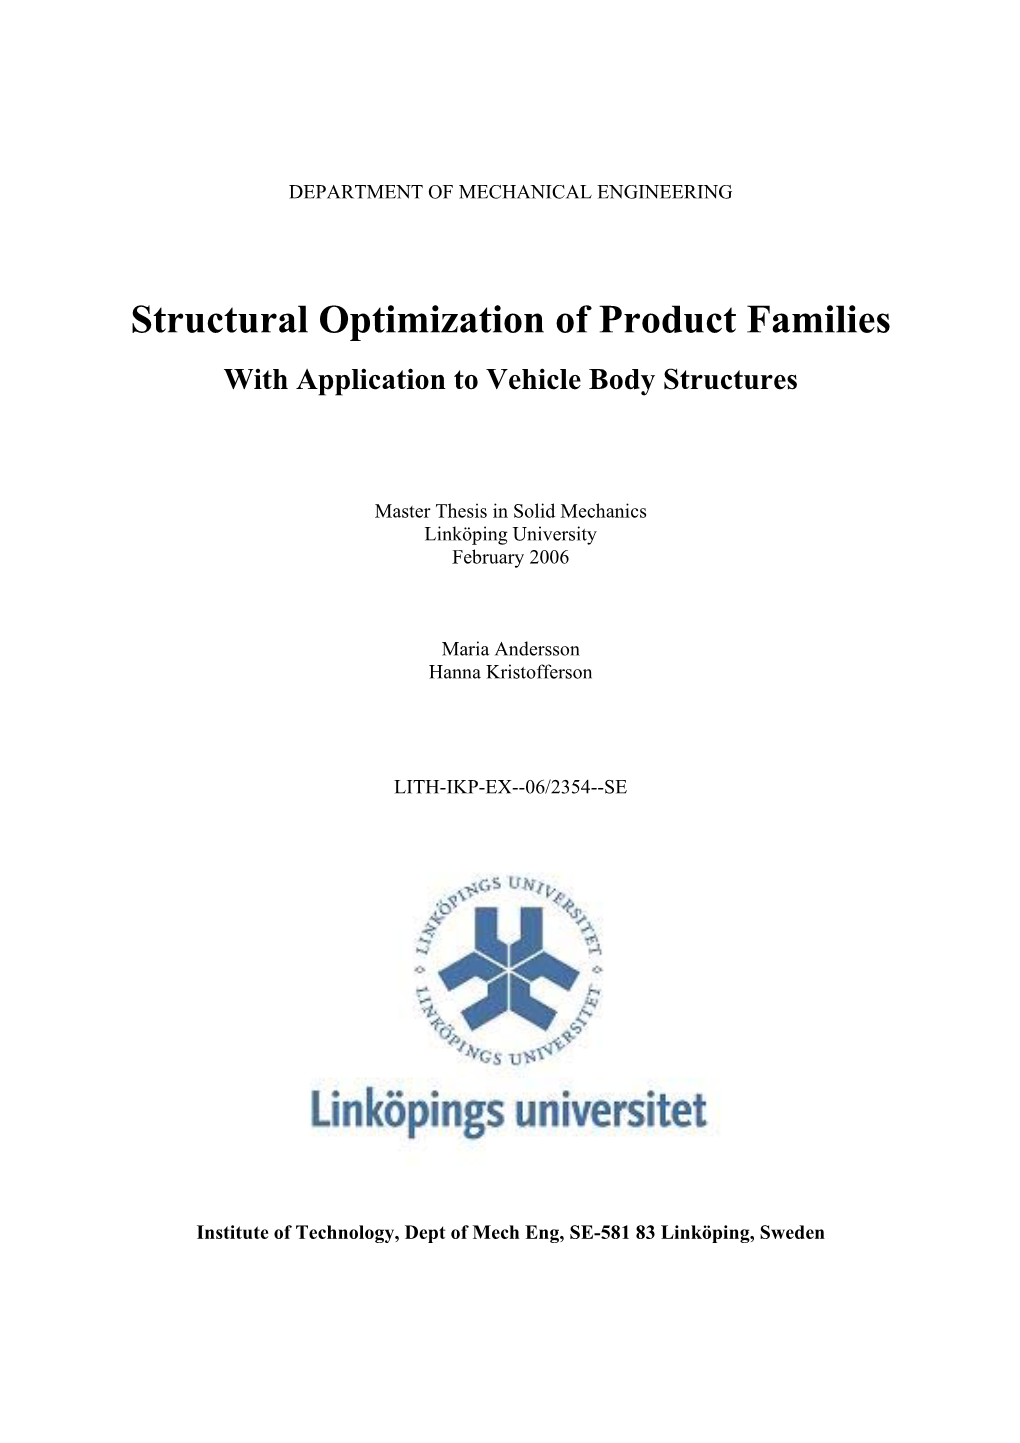 Structural Optimization of Product Families with Application to Vehicle Body Structures